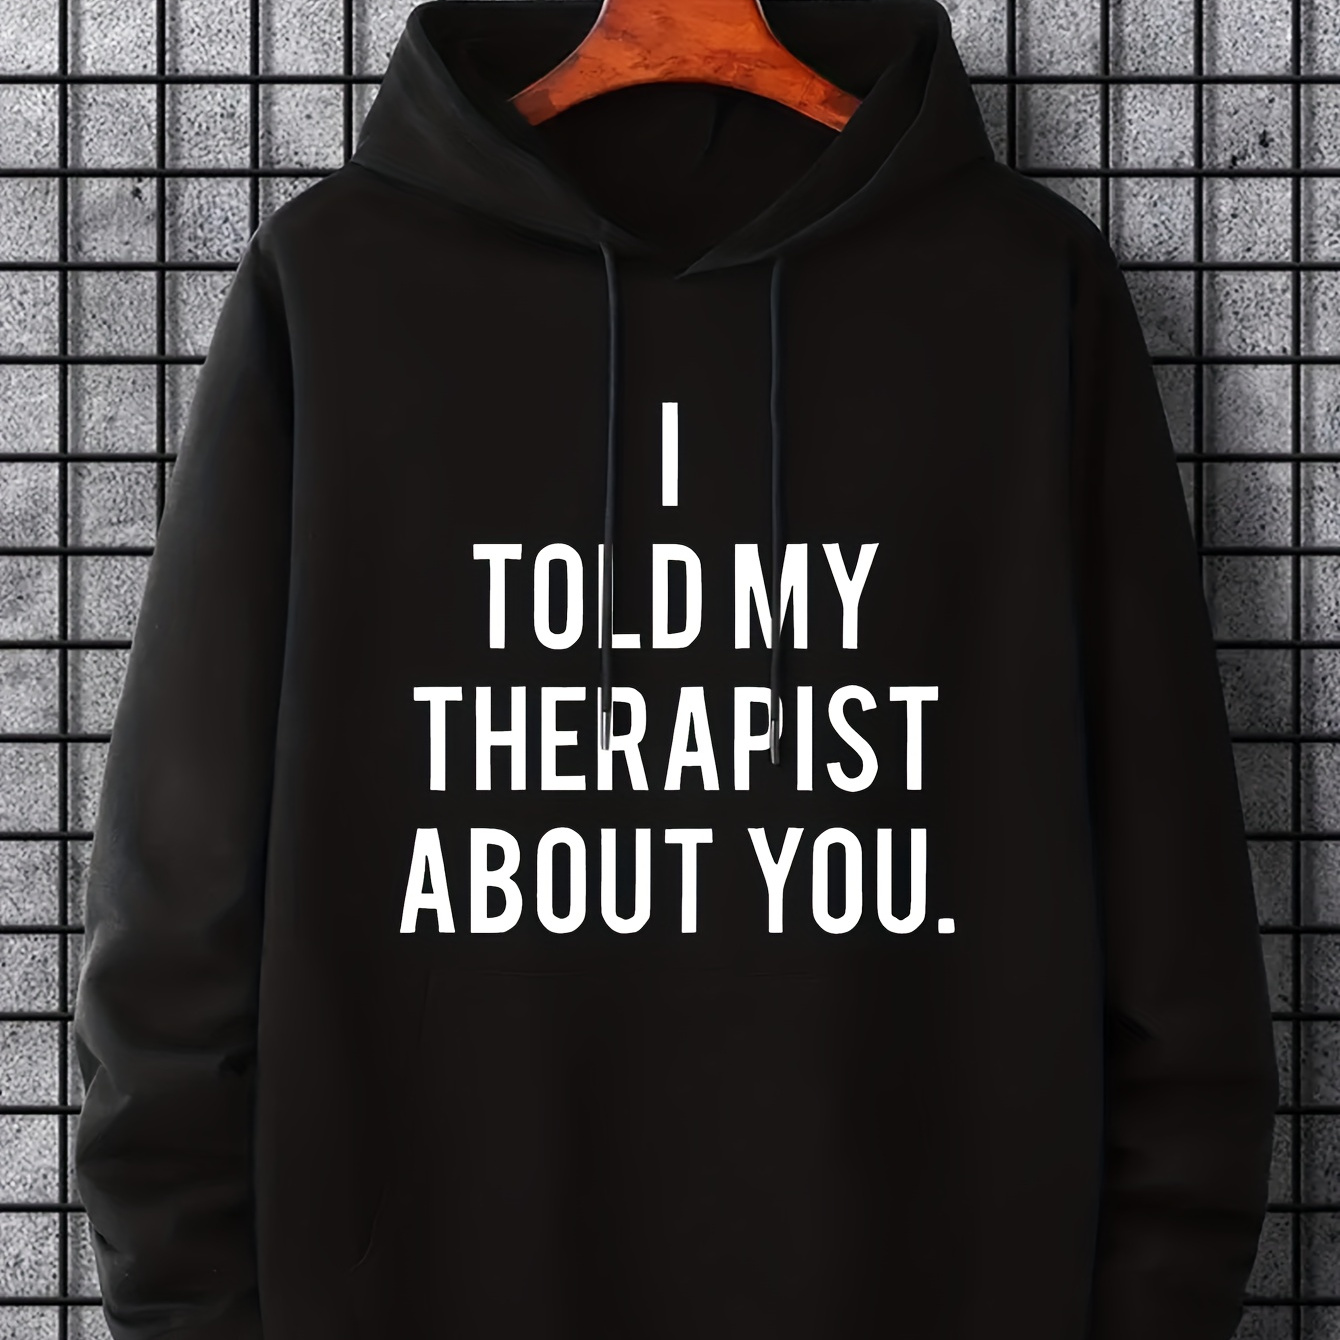 

I Told My Therapist About You, Men's Letter Print Hoodie, Casual Slightly Stretch Drawstring Hooded Sweatshirt, Men's Clothings For Outdoor